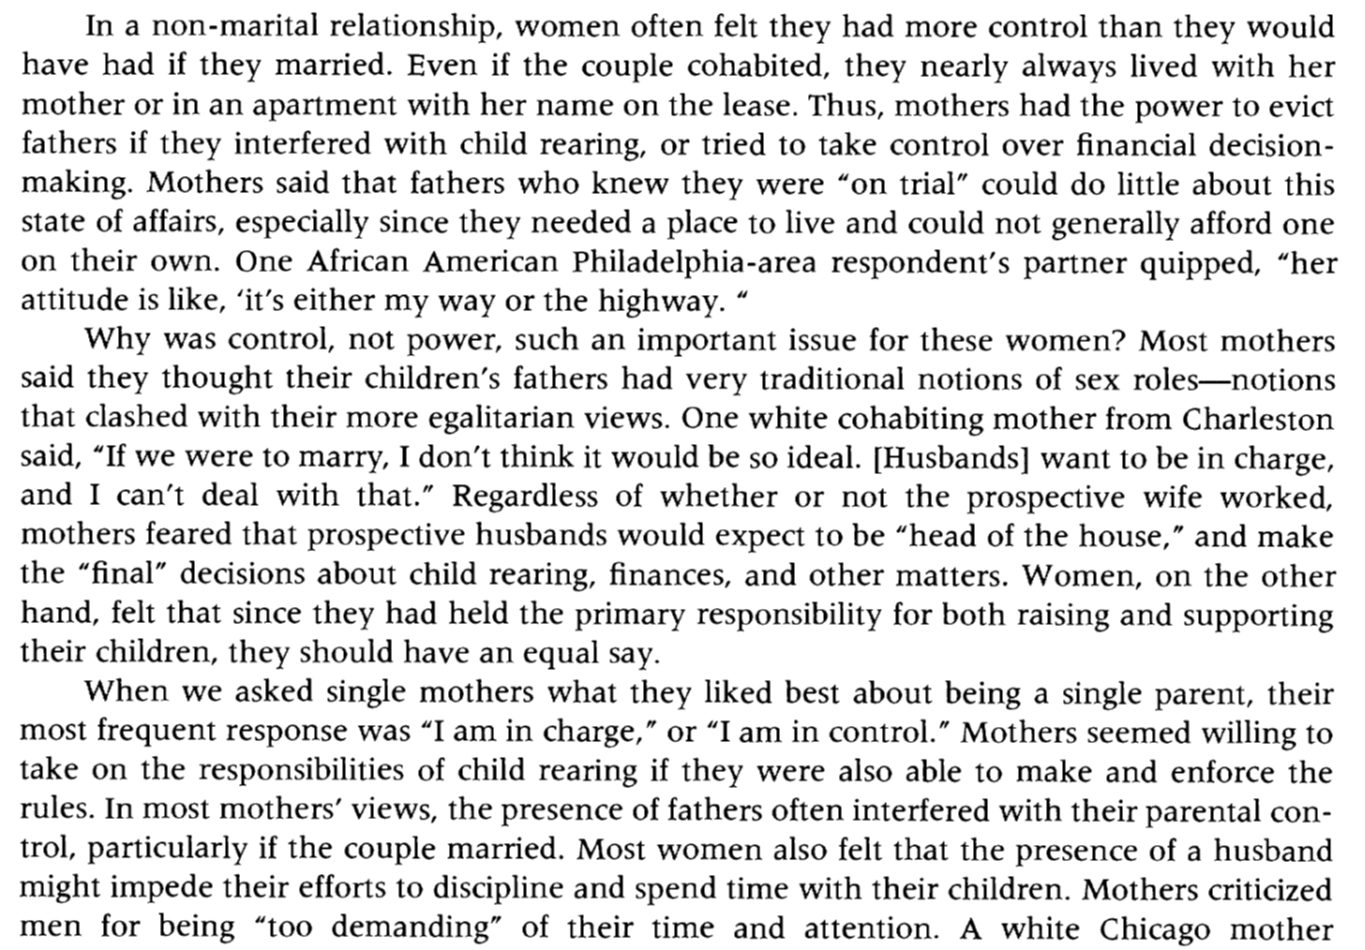 A screenshot of text that reads: "In a non-marital relationship, women often felt they had more control than they would have had if they married. Even if the couple cohabited, they nearly always lived with her mother or in an apartment with her name on the lease. Thus, mothers had the power to evict fathers if they interfered with child rearing, or tried to take control over financial decision-making. Mothers said that fathers who knew they were "on trial” could do little about this state of affairs, especially since they needed a place to live and could not generally afford one on their own. One African American Philadelphia-area respondent's partner quipped, "her attitude is like, ‘it's either my way or the highway.’" Why was control, not power, such an important issue for these women? Most mothers said they thought their children's fathers had very traditional notions of sex roles-notions that clashed with their more egalitarian views. One white cohabiting mother from Charleston said, "If we were to marry, I don't think it would be so ideal. [Husbands] want to be in charge, and I can't deal with that.” Regardless of whether or not the prospective wife worked, mothers feared that prospective husbands would expect to be “head of the house,” and make the “final” decisions about child rearing, finances, and other matters. Women, on the other hand, felt that since they had held the primary responsibility for both raising and supporting their children, they should have an equal say. When we asked single mothers what they liked best about being a single parent, their most frequent response was “I am in charge,” or “I am in control.” Mothers seemed willing to take on the responsibilities of child rearing if they were also able to make and enforce the rules. In most mothers' views, the presence of fathers often interfered with their parental control, particularly if the couple married. Most women also felt that the presence of a husband might impede their efforts to discipline and spend time with their children. Mothers criticized men for being “too demanding” of their time and attention. A white Chicago mother [the text ends mid-sentence]."